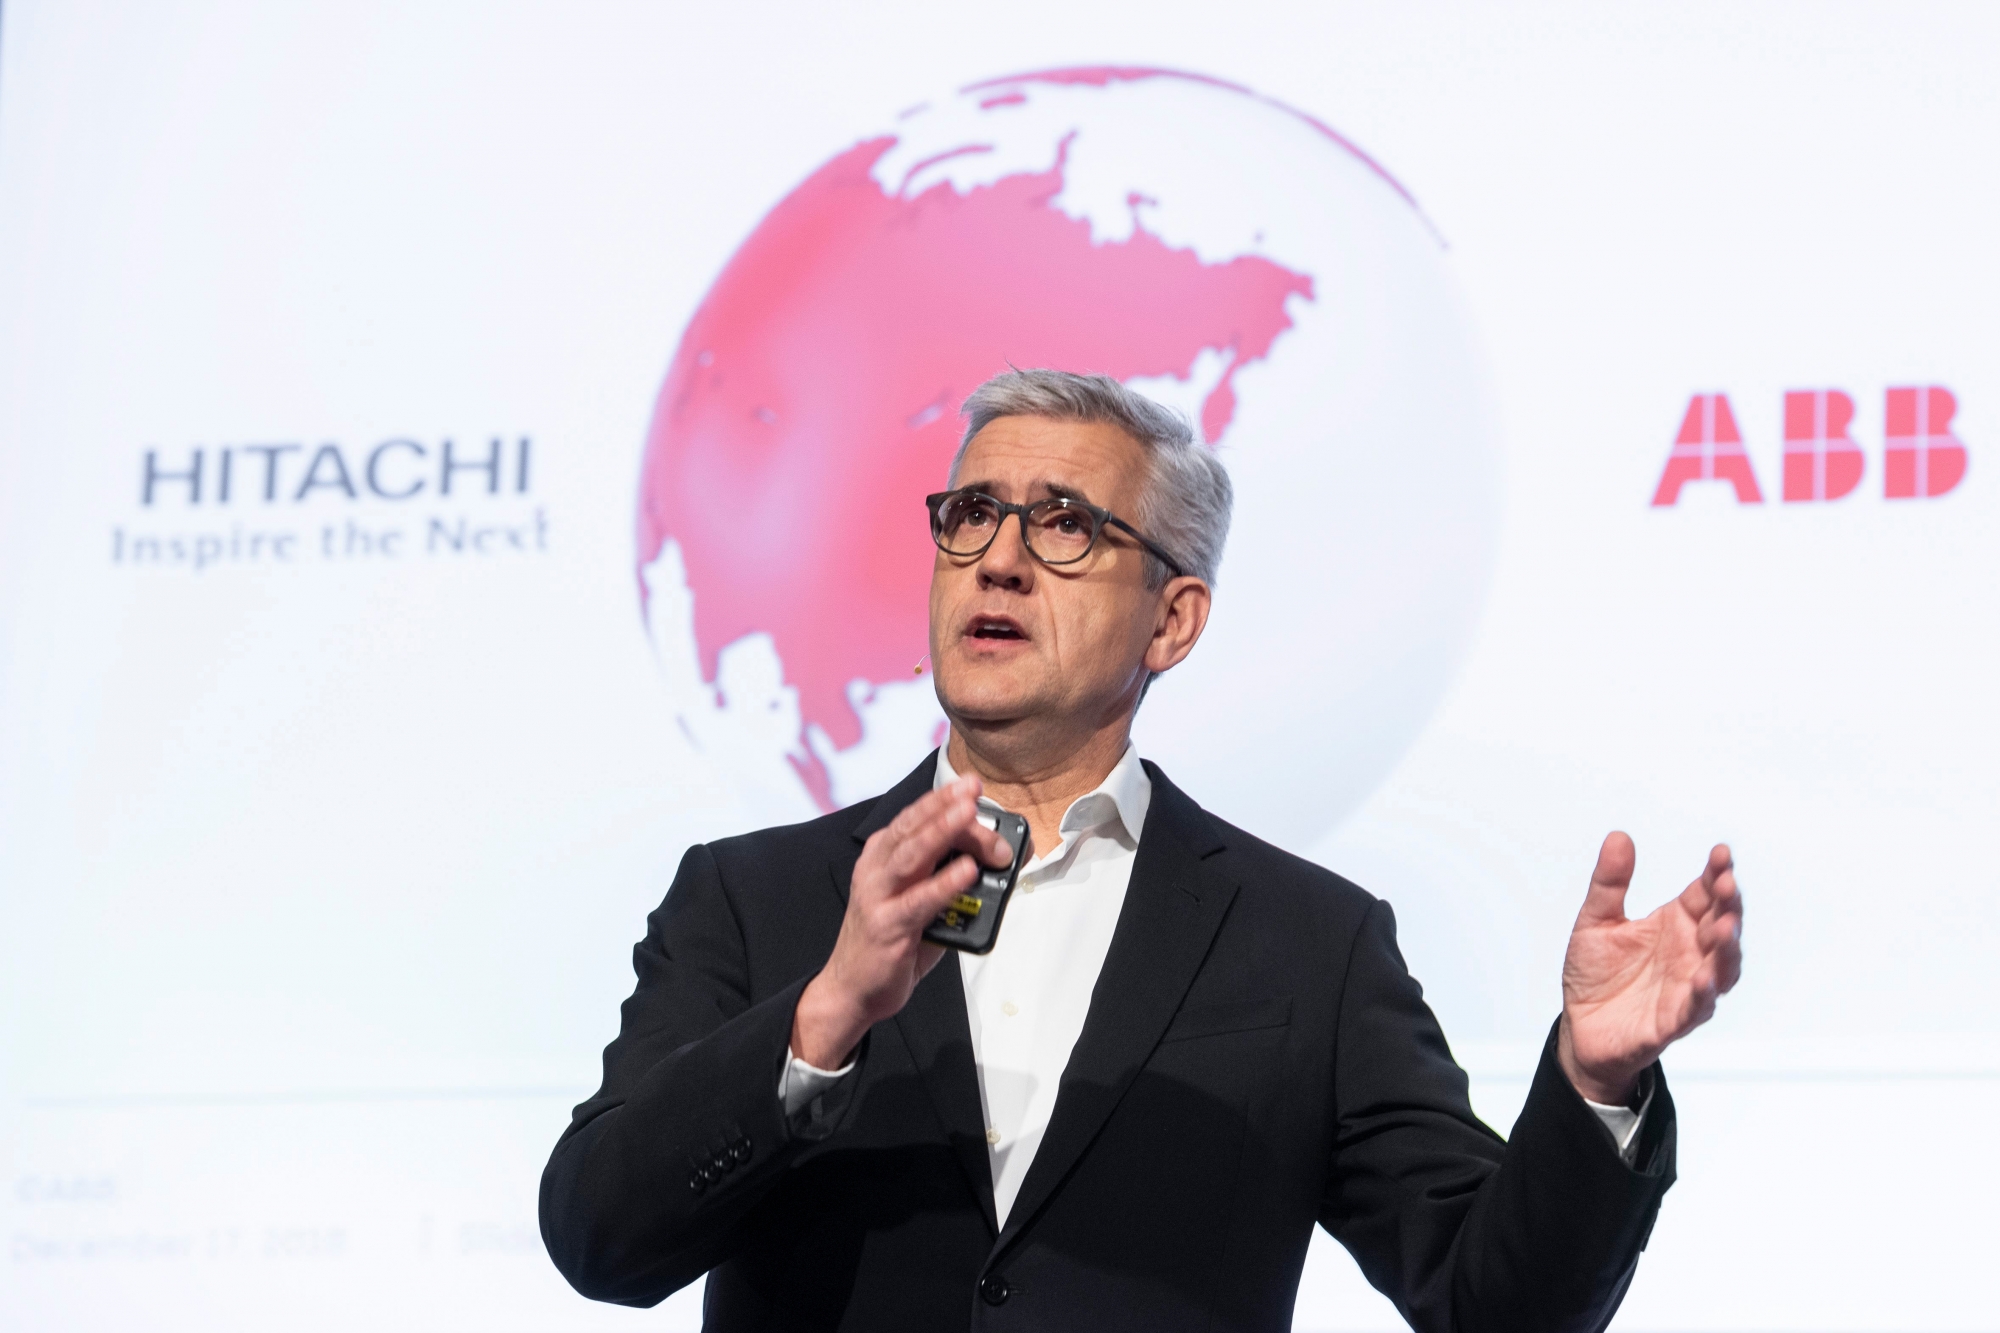 Ulrich Spiesshofer, CEO of ABB, speaks during a press conference about the divestment of ABBs power grid division to the Japanese company Hitachi, on Monday, December 17, 2018, in Zurich, Switzerland. Under the terms of the agreement, ABB will receive 7.6 to 7.8 billion US dollars for 80 percent of its grid business. (KEYSTONE/Ennio Leanza)
 SWITZERLAND ABB HITACHI